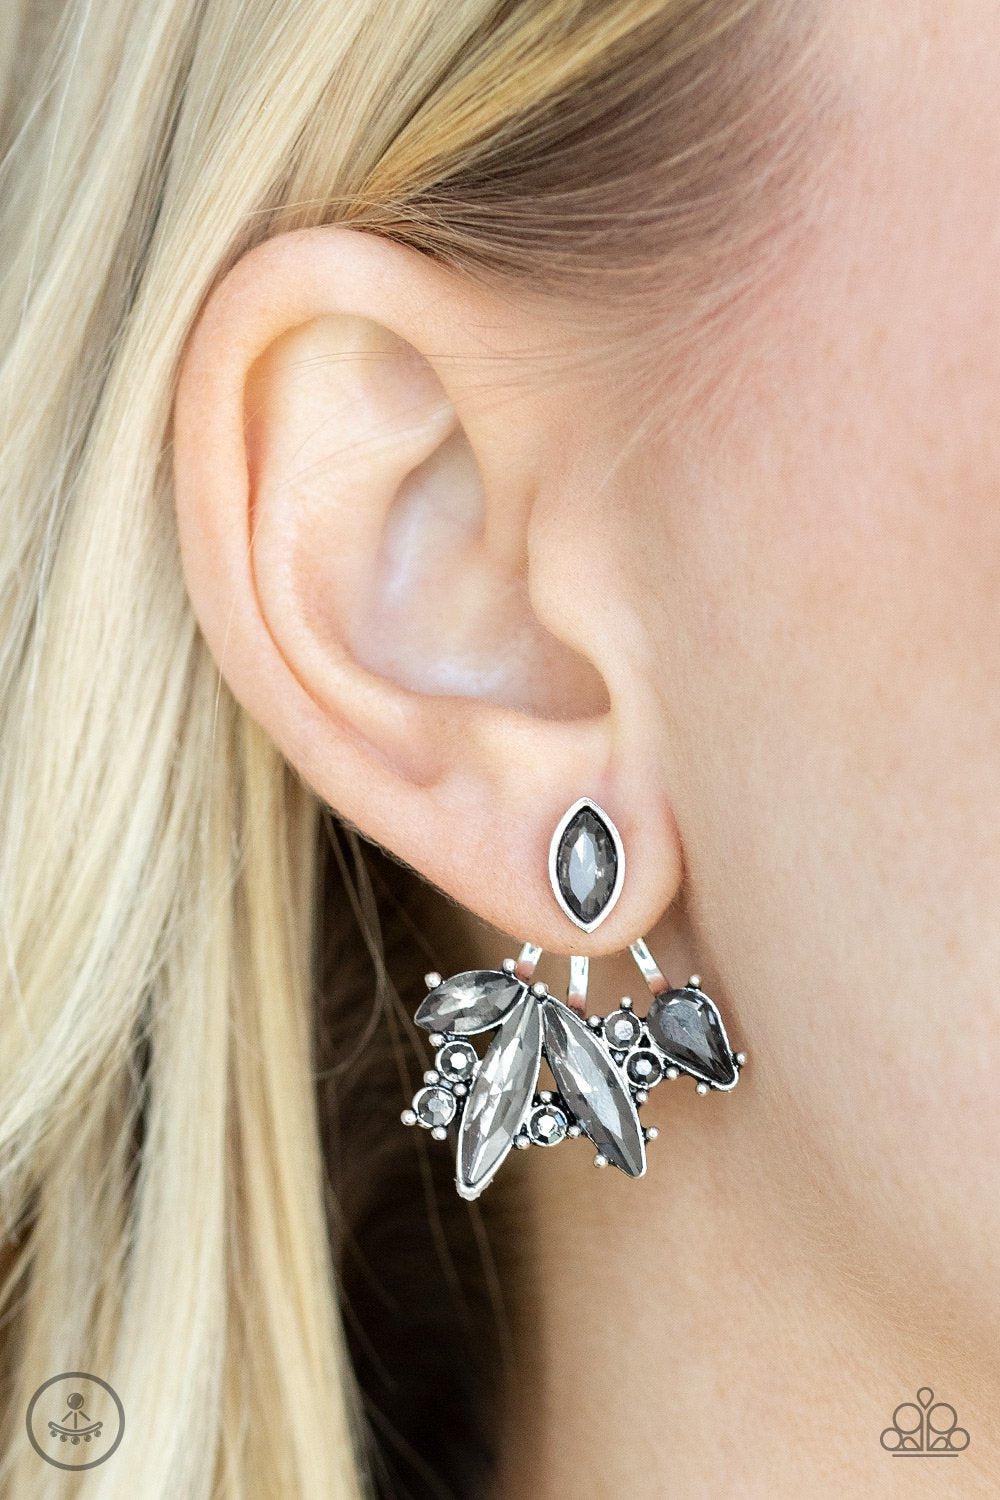 Deco Dynamite Silver Smoky Rhinestone Double-sided Post Earrings - Paparazzi Accessories- lightbox - CarasShop.com - $5 Jewelry by Cara Jewels